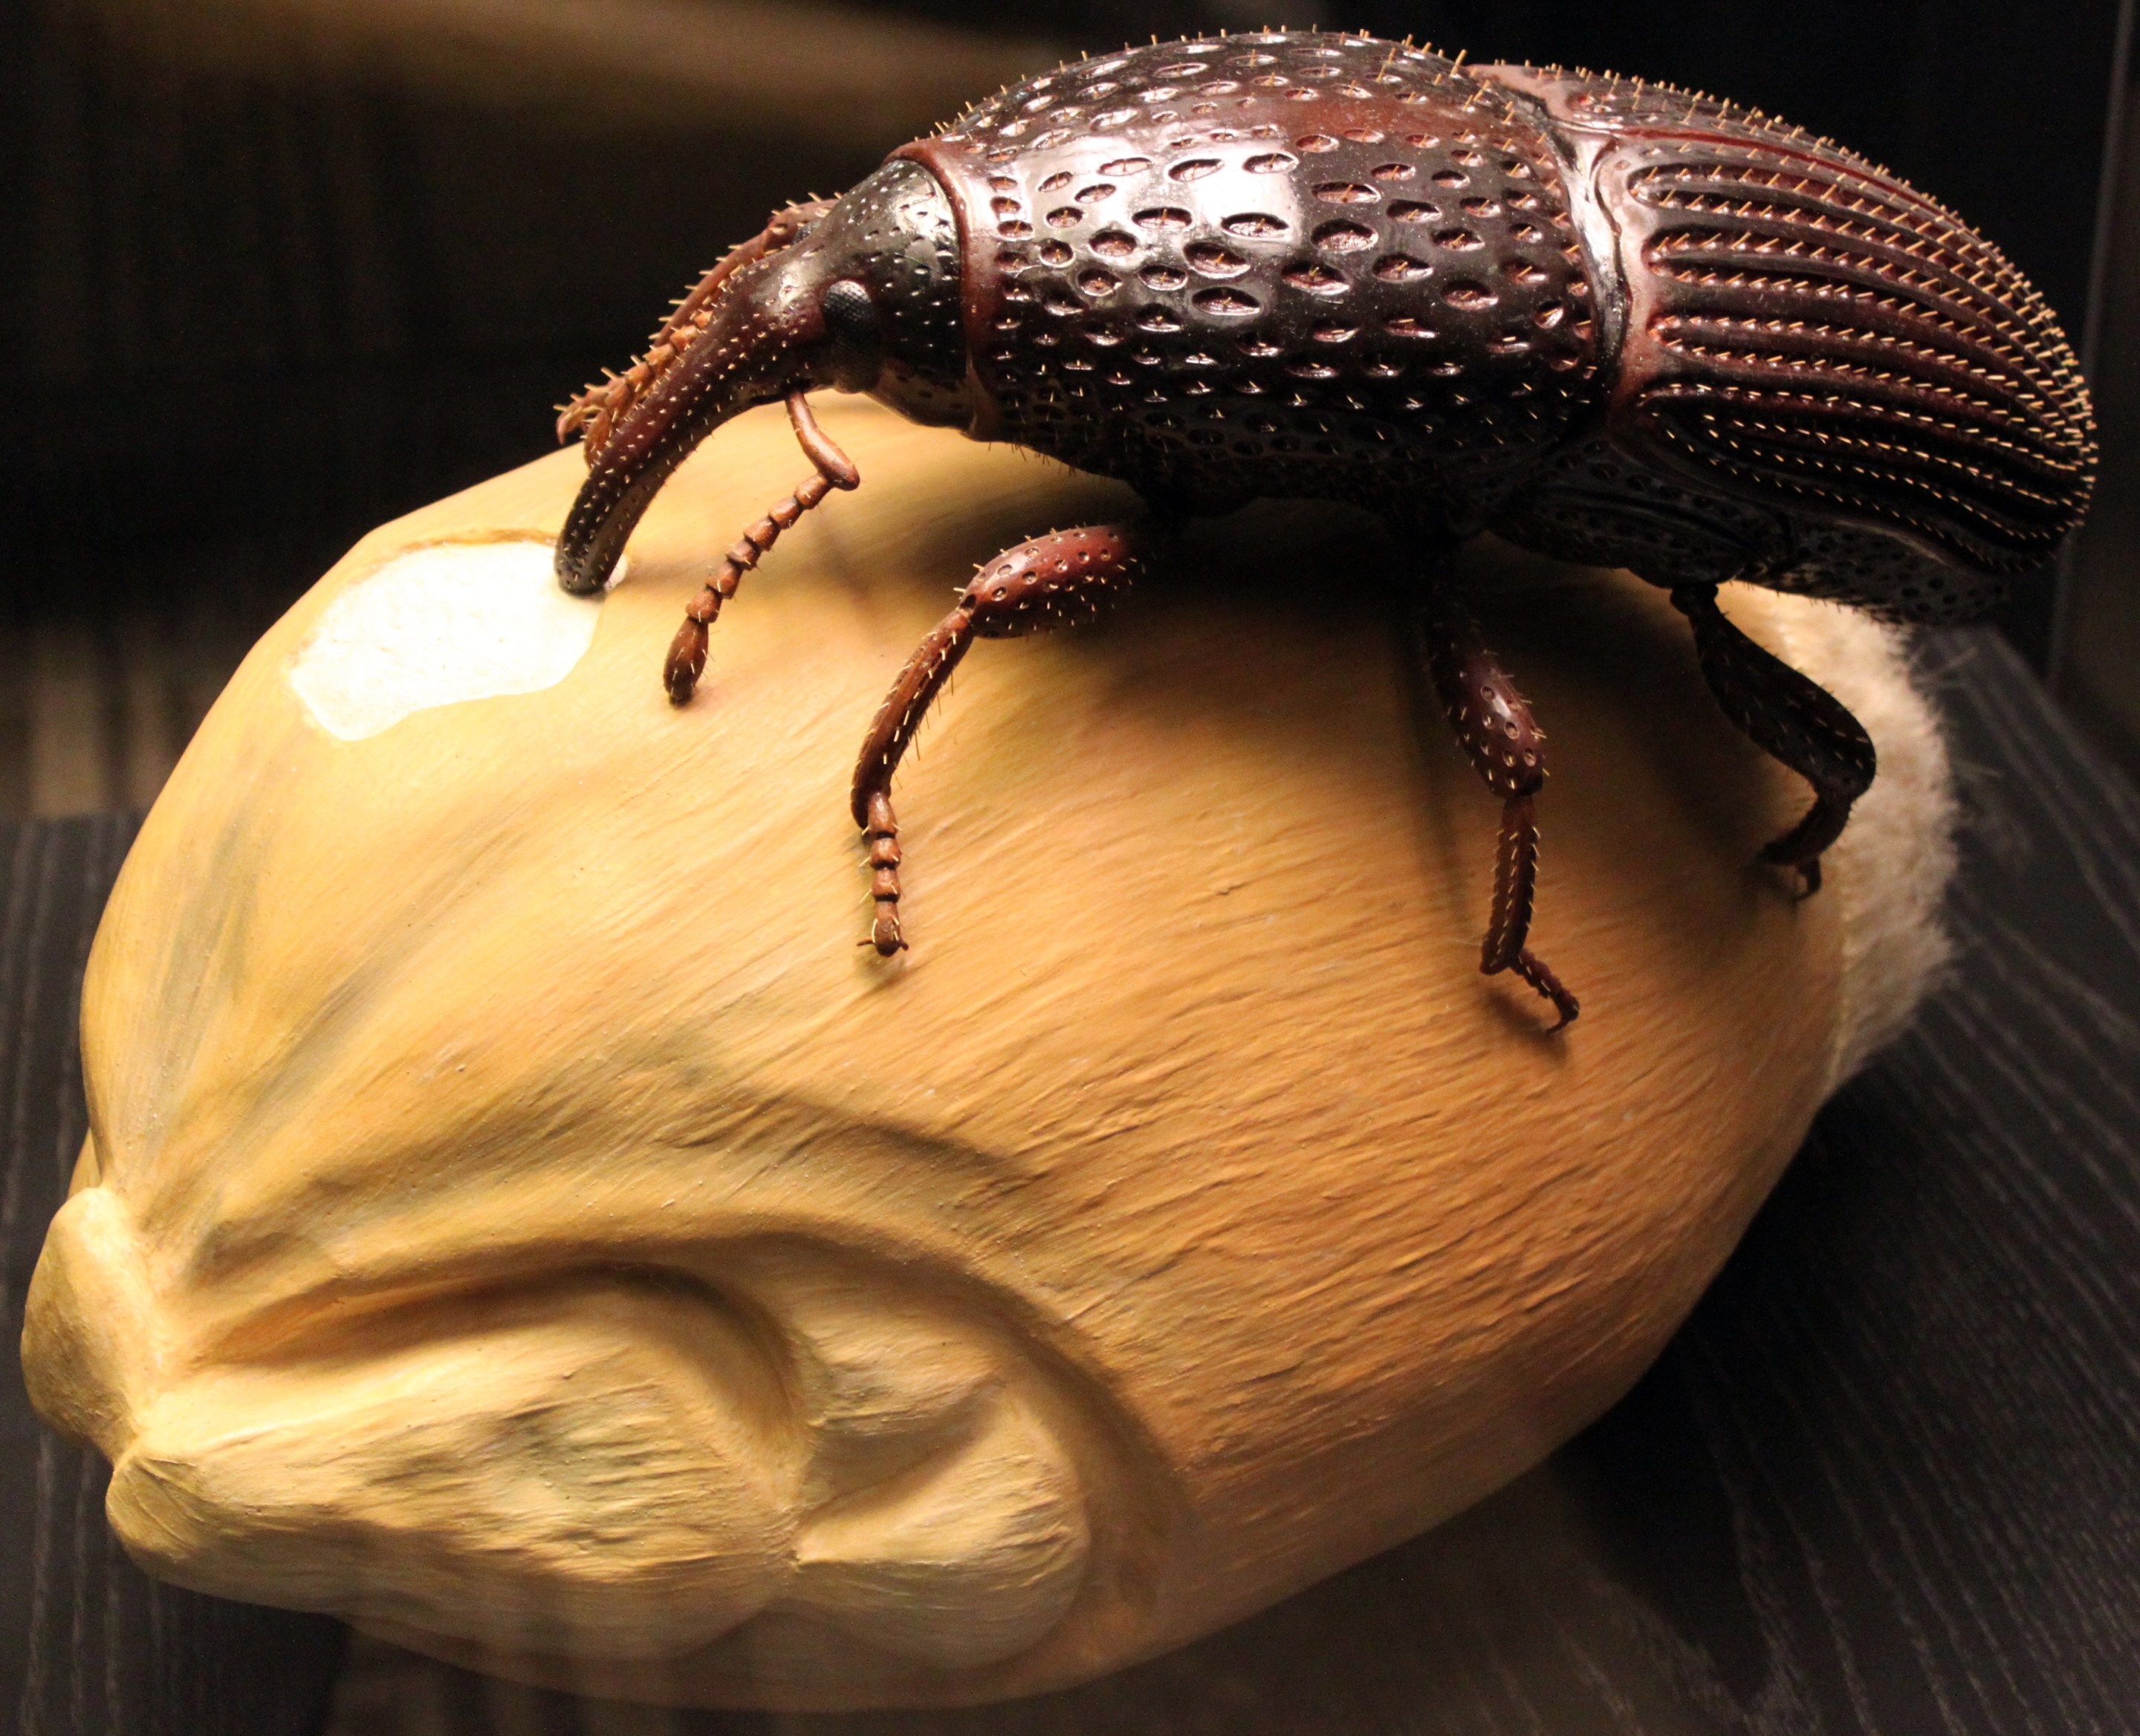 A model of a brown grain weevil resting on a grain.